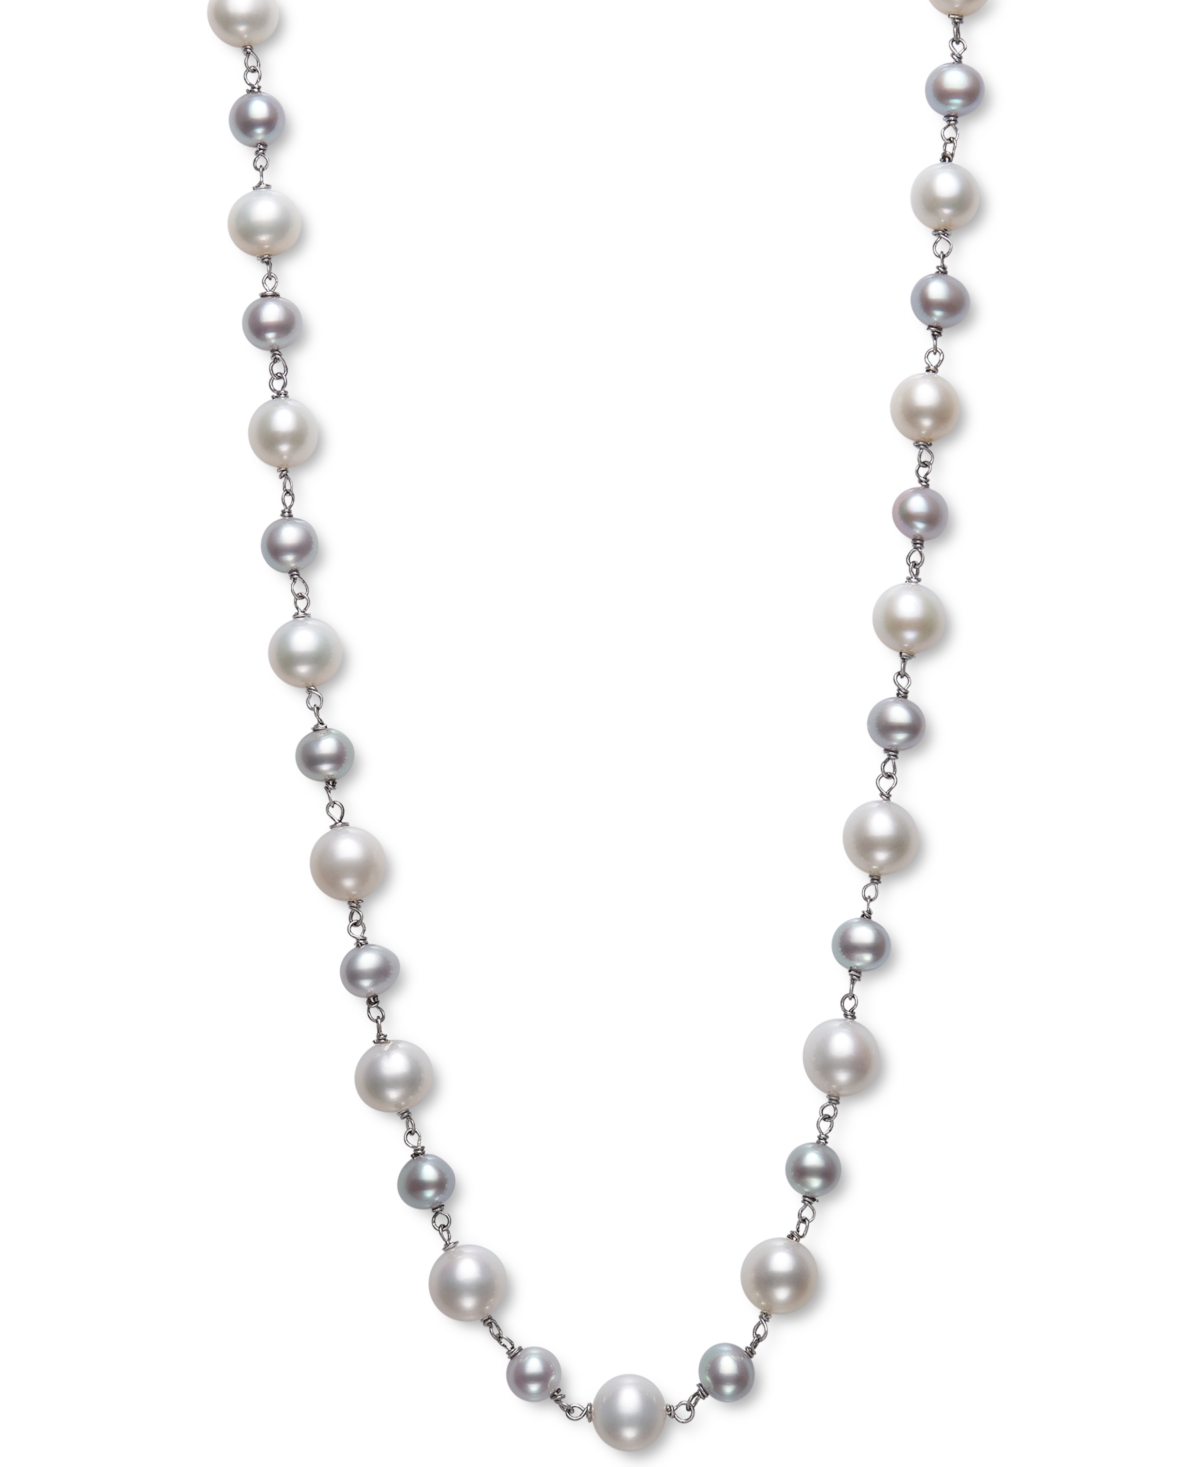 Gray & White Cultured Freshwater Pearl (5-6mm & 7-8mm) Statement Necklace in Sterling Silver, 18" + 2" extender (Also in Pink & White Cul